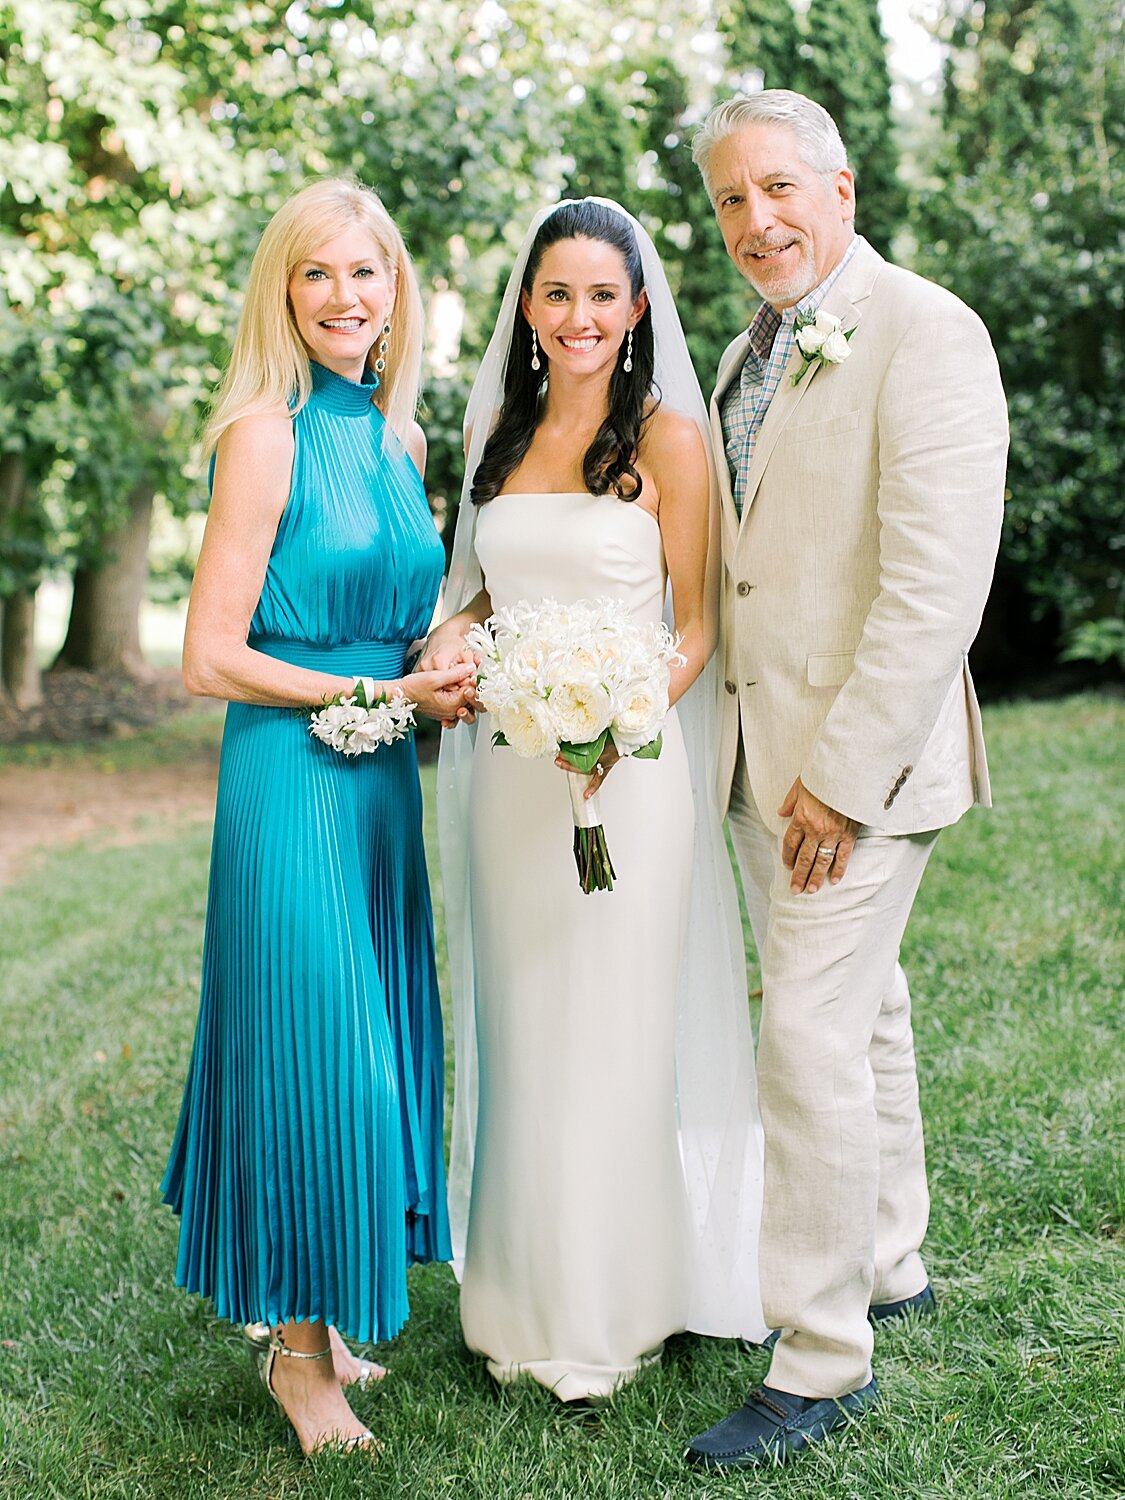 bride poses with family in New York yard | Stylish Private Home Wedding Inspiration | Asher Gardner Photography